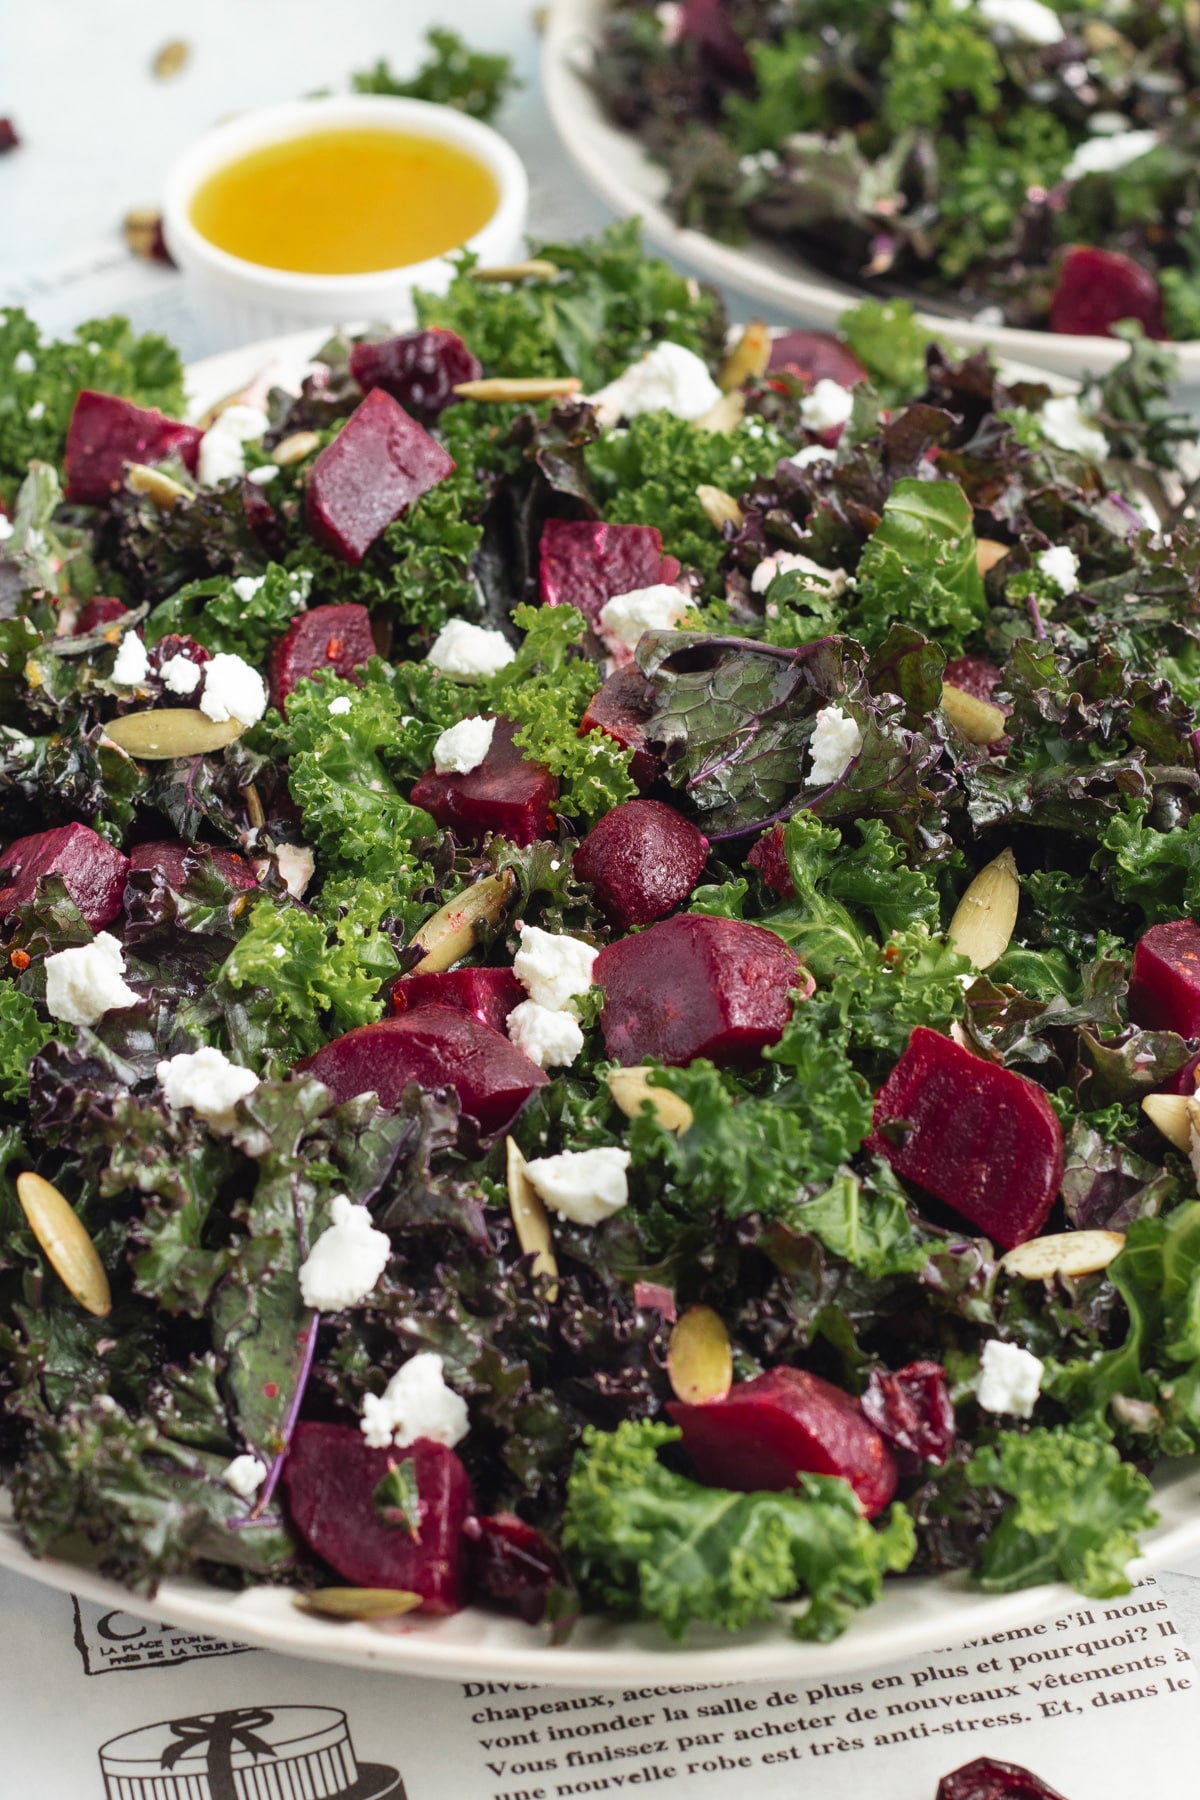 This is a picture of kale salad with beets.